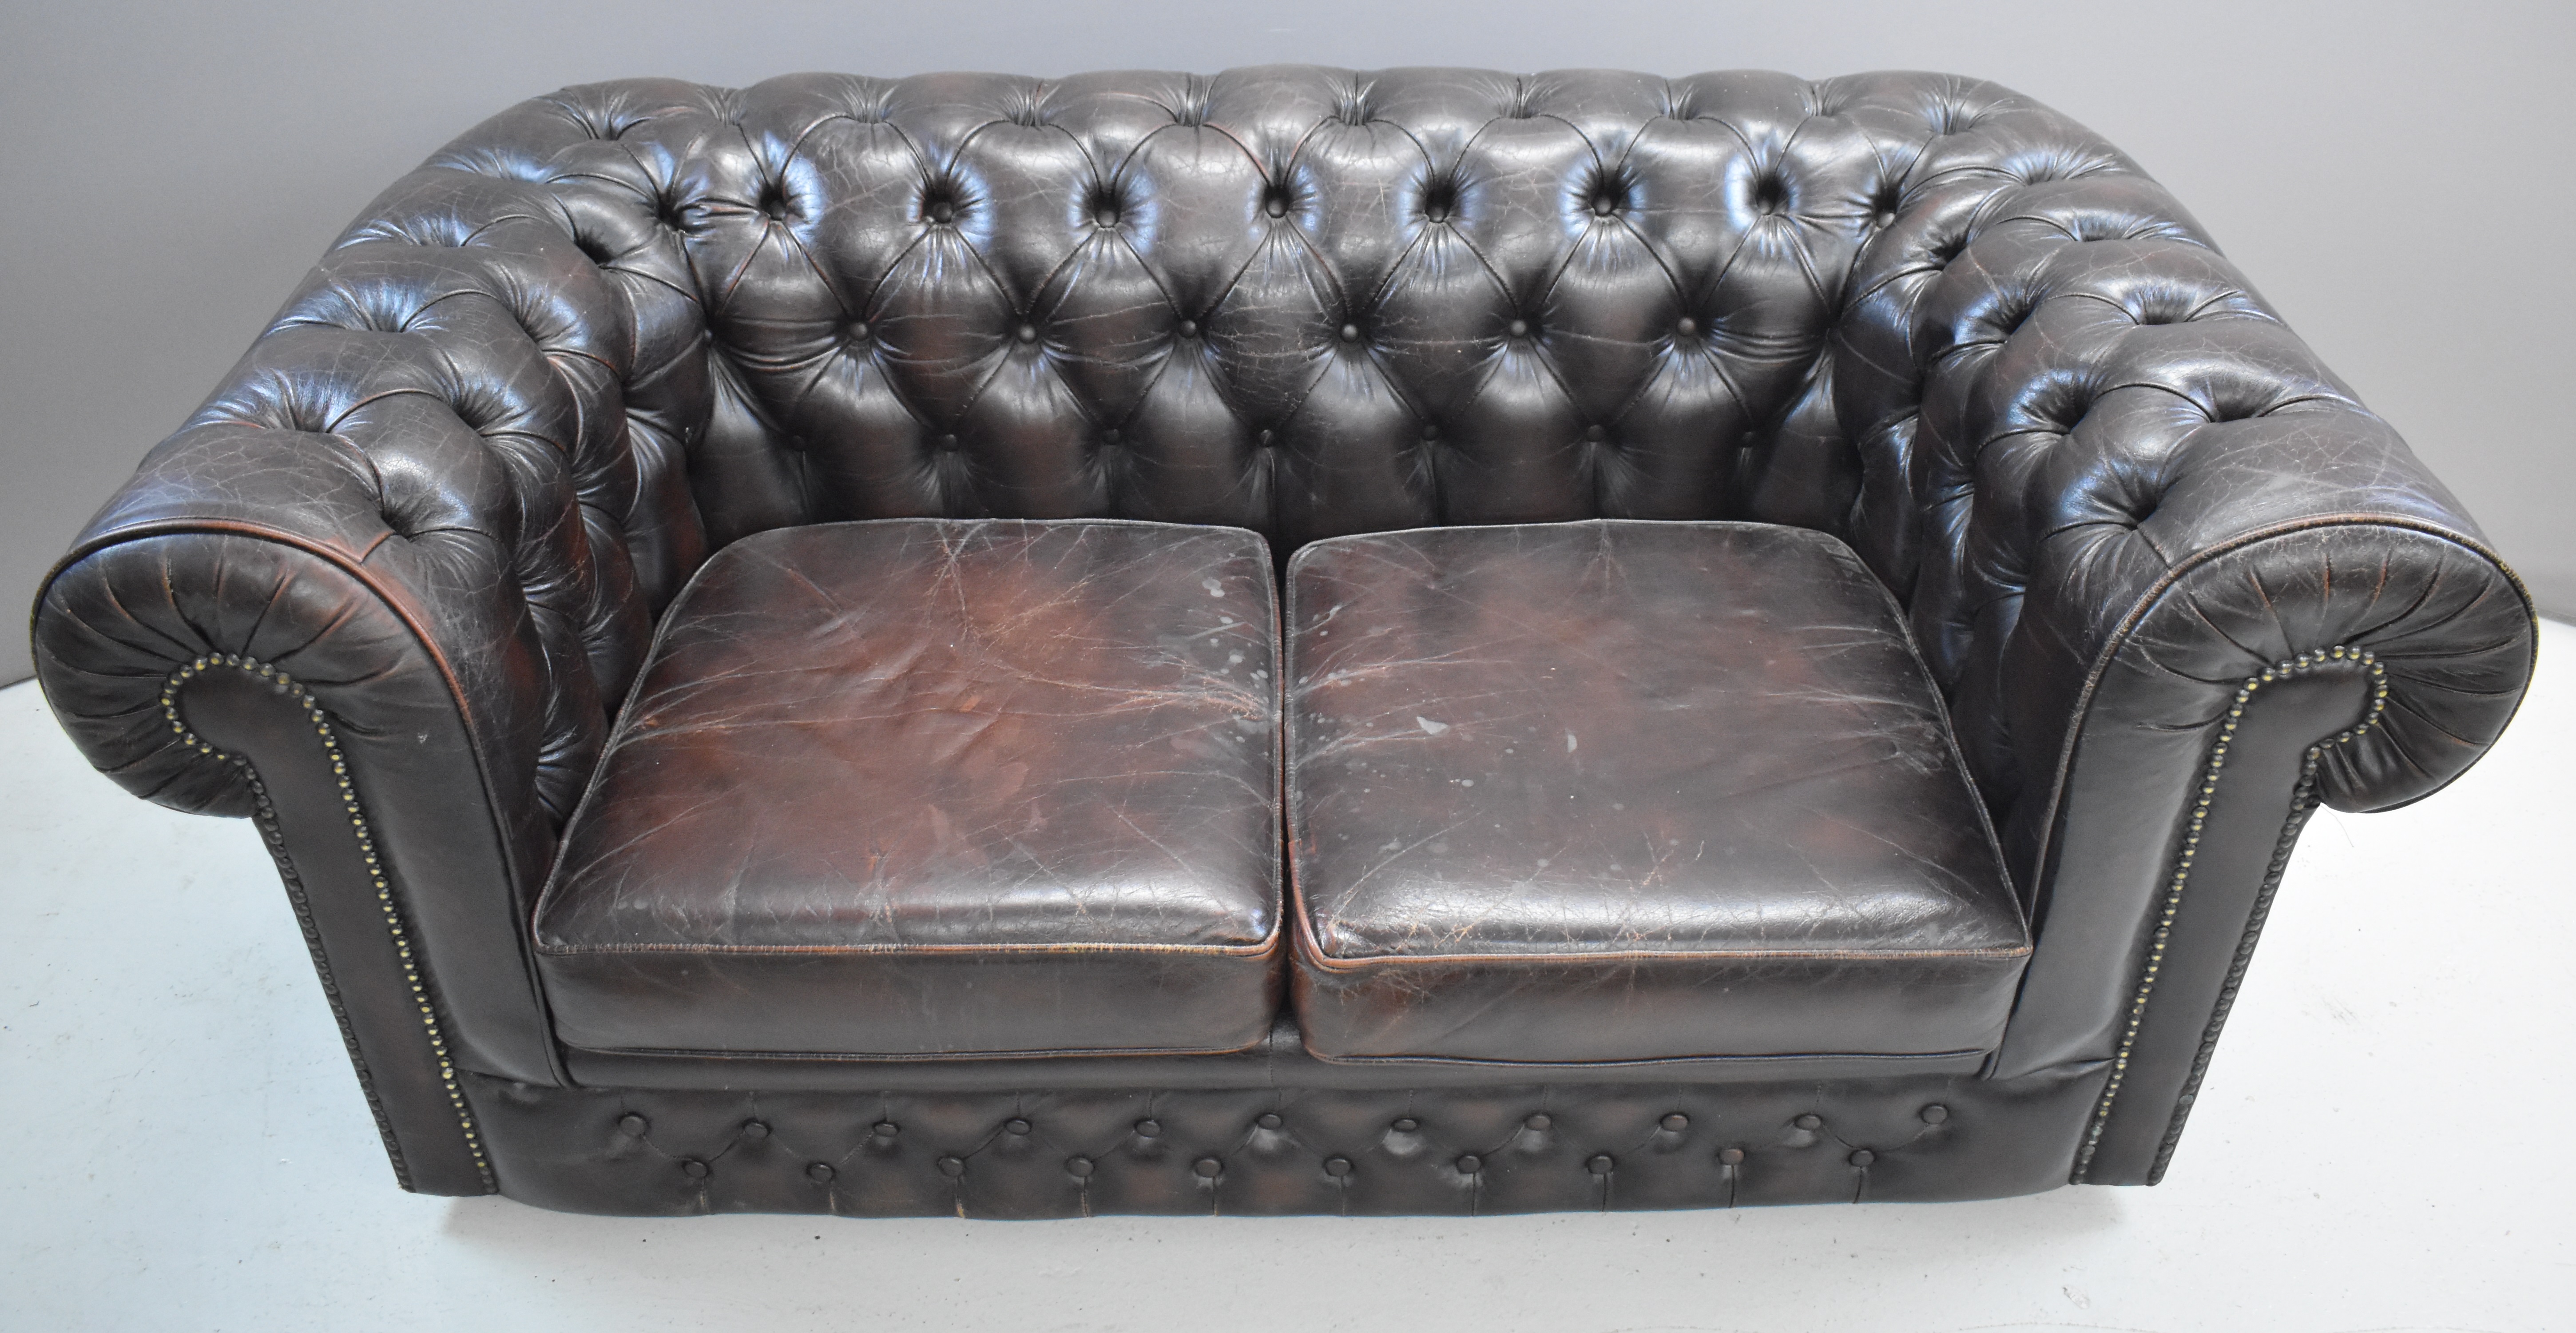 Brown leather Chesterfield two seater sofa, width 160 x height 70cm - Image 2 of 4